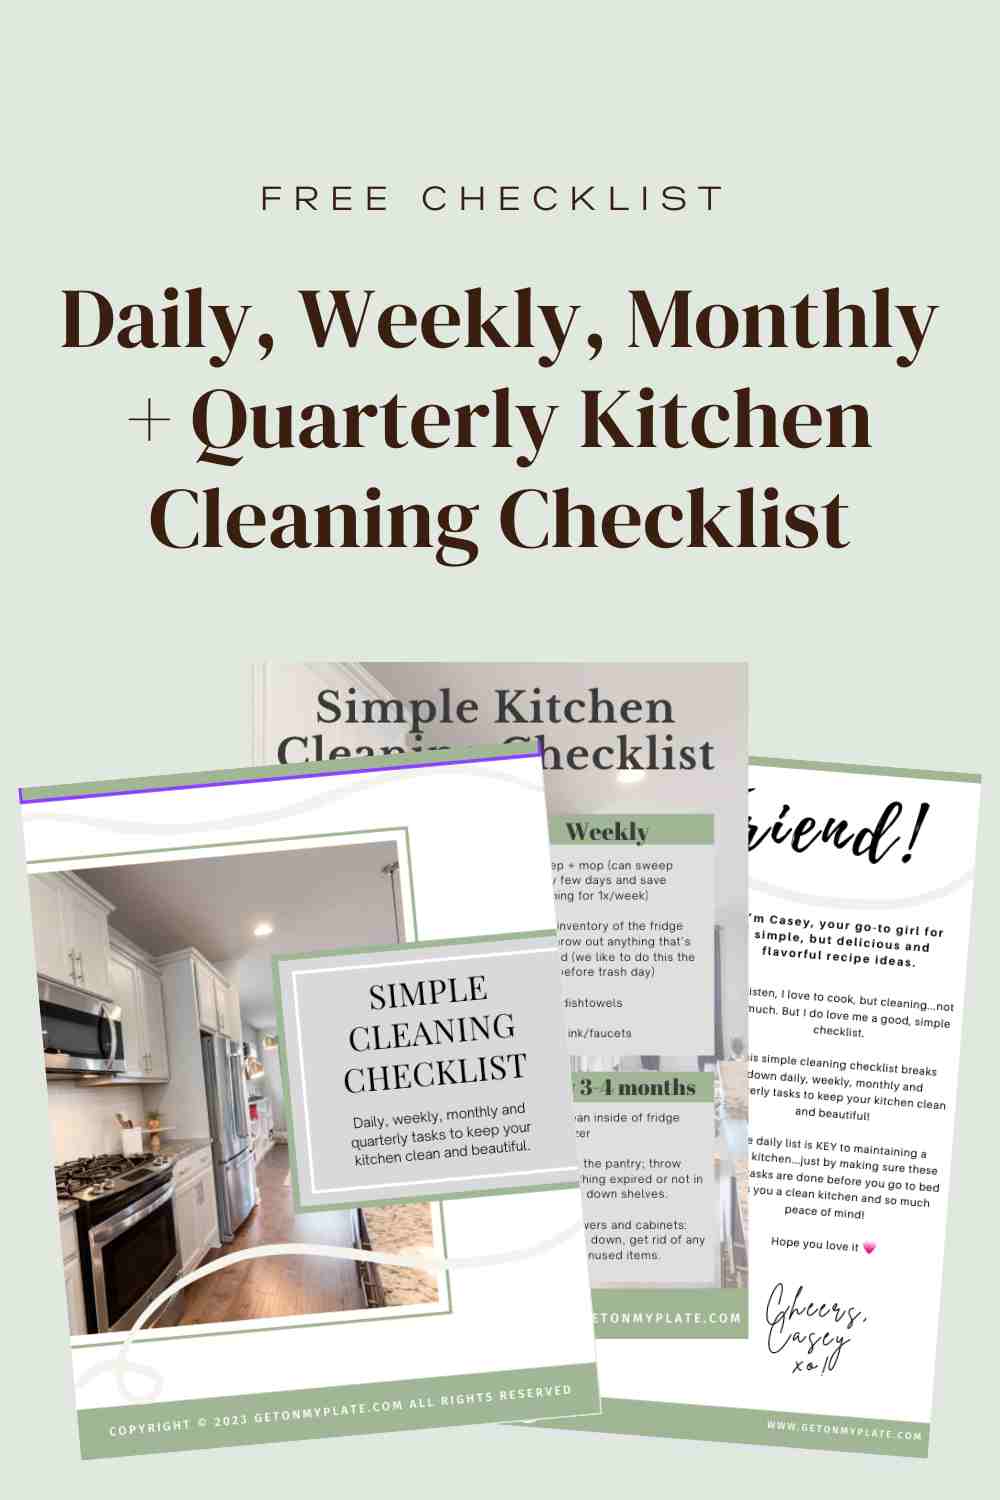 Screen shots for simple kitchen cleaning checklist.